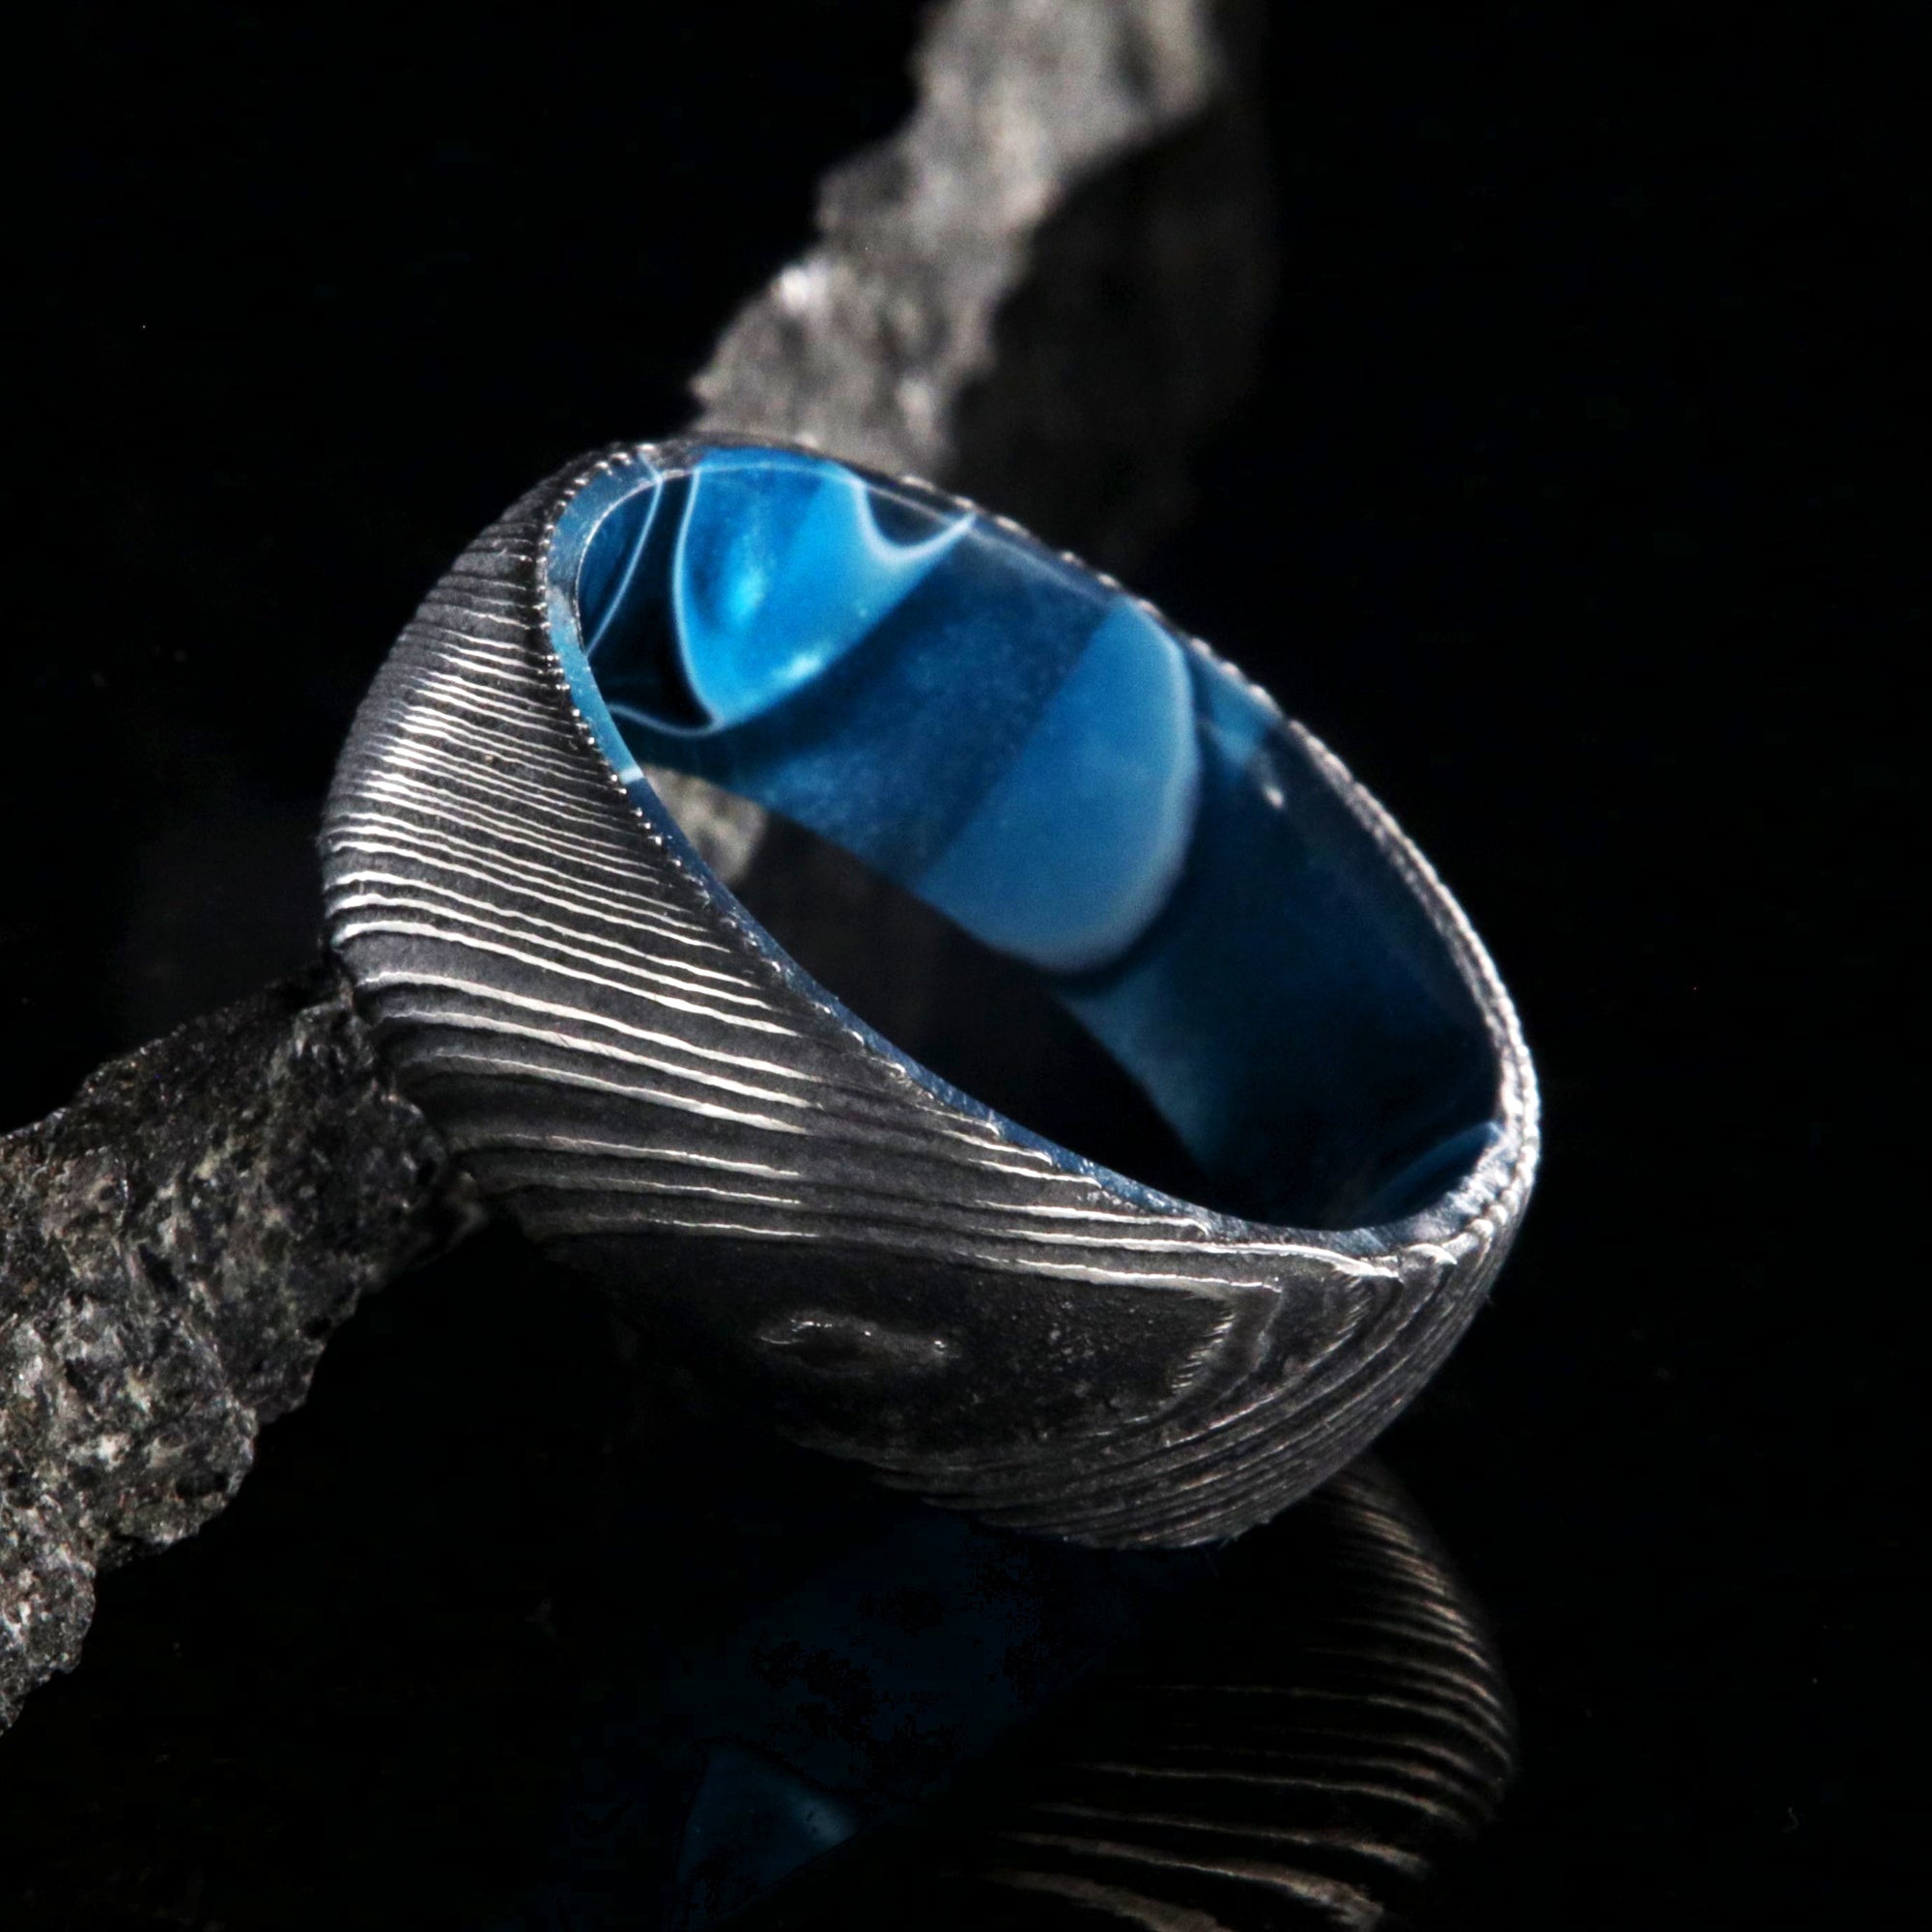 7mm wide black Damascus steel wedding band with an ocean blue sleeve and rounded profile